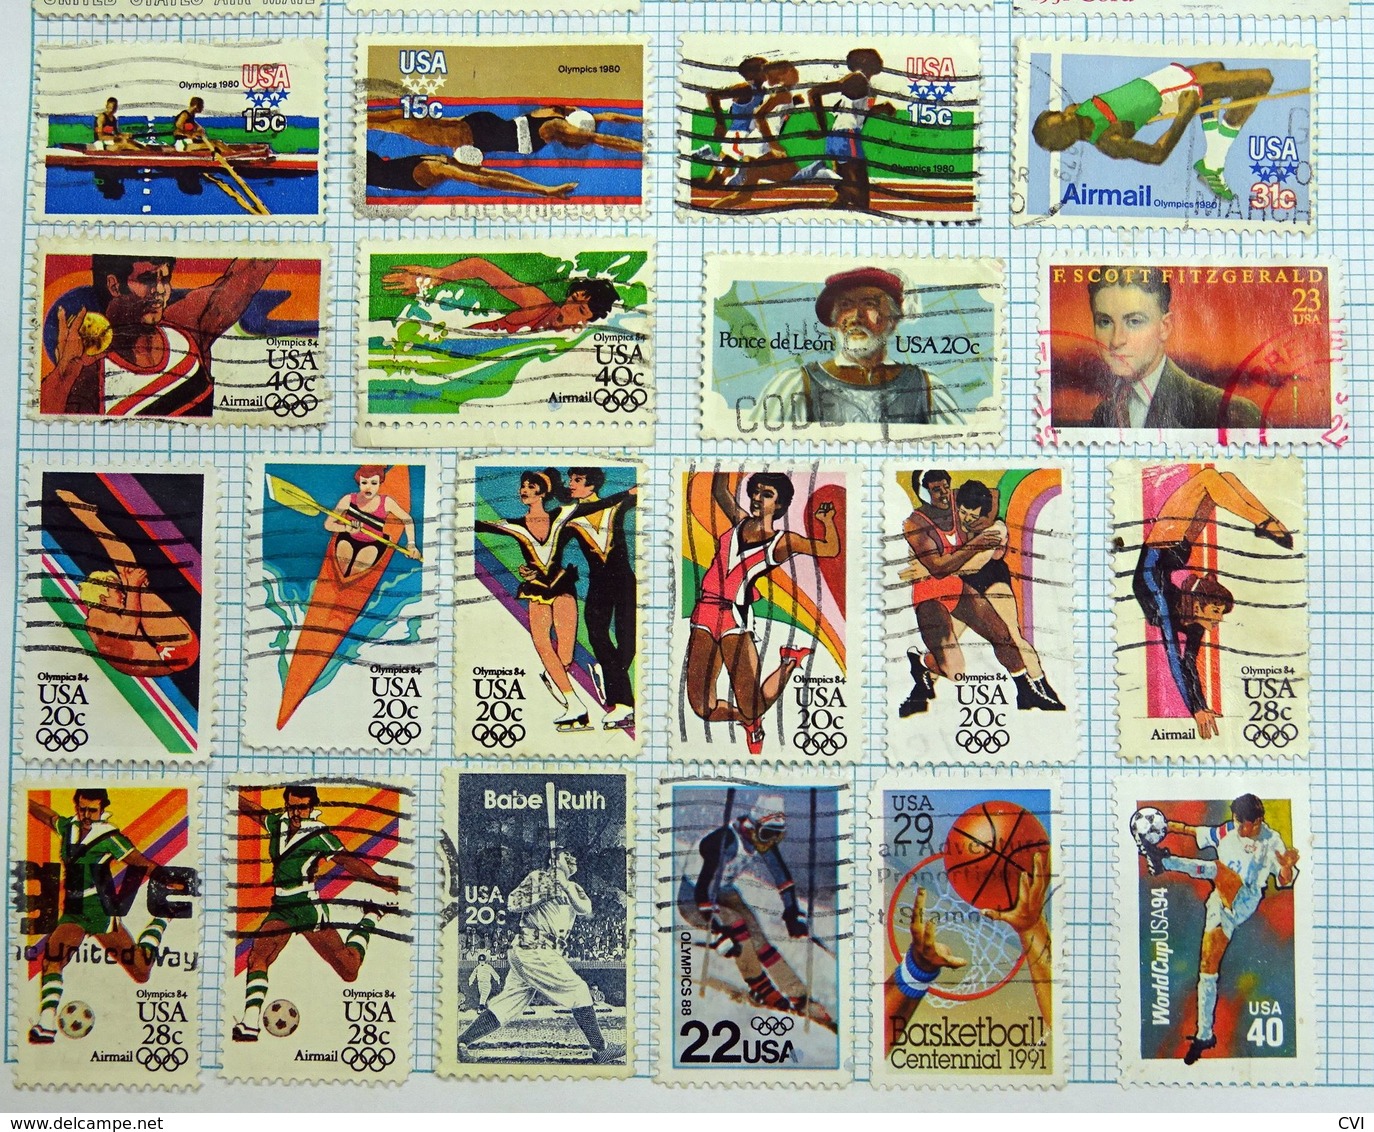 USA Mid Period to Modern, Air Mail, Christmas Stamps, etc on Pages.